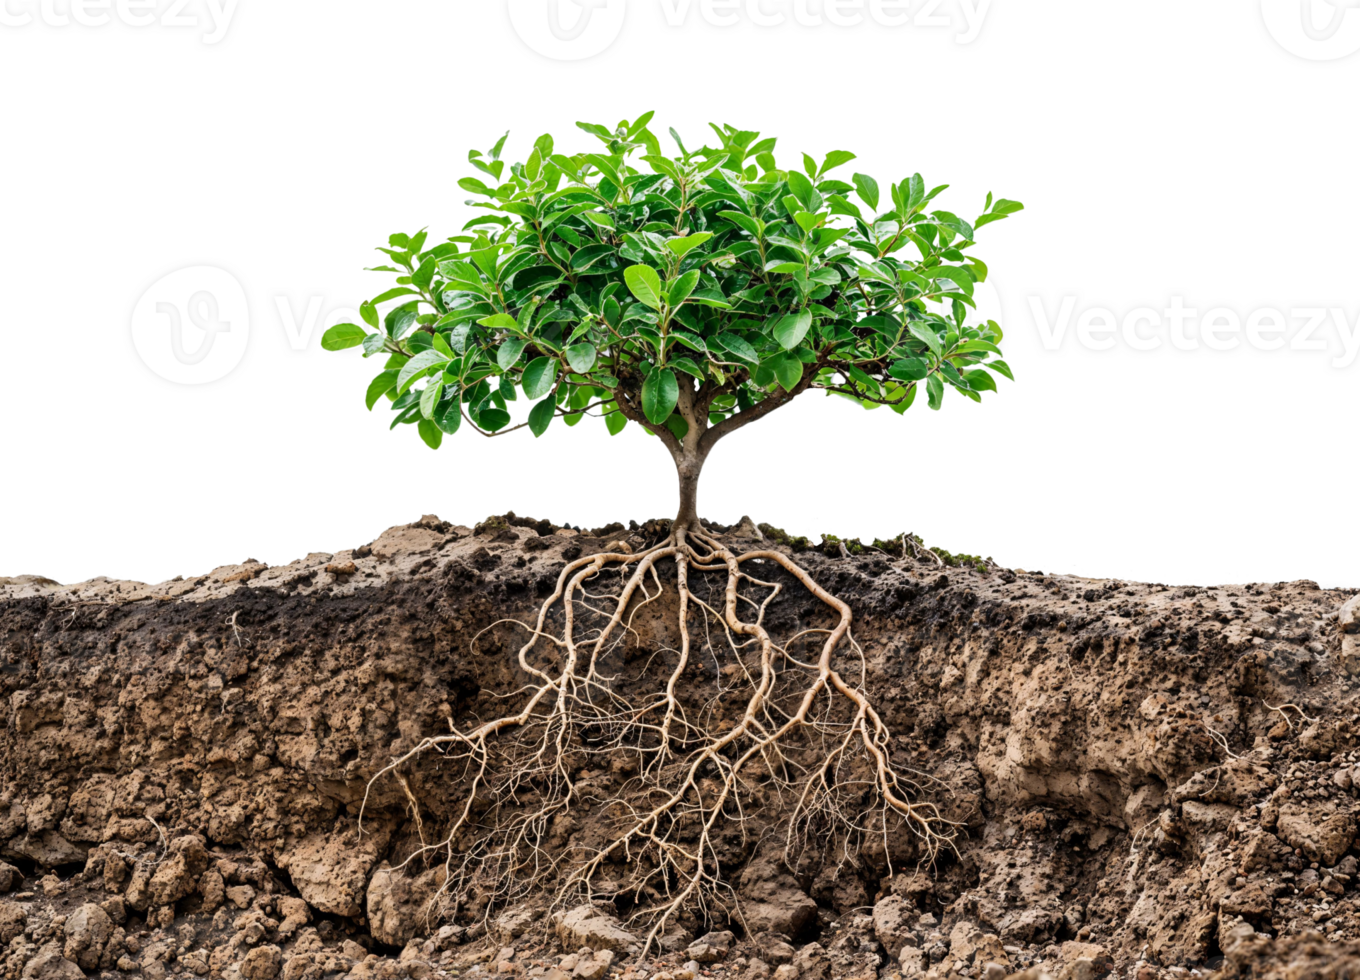 A detailed image of small tree with root system growing underground. png